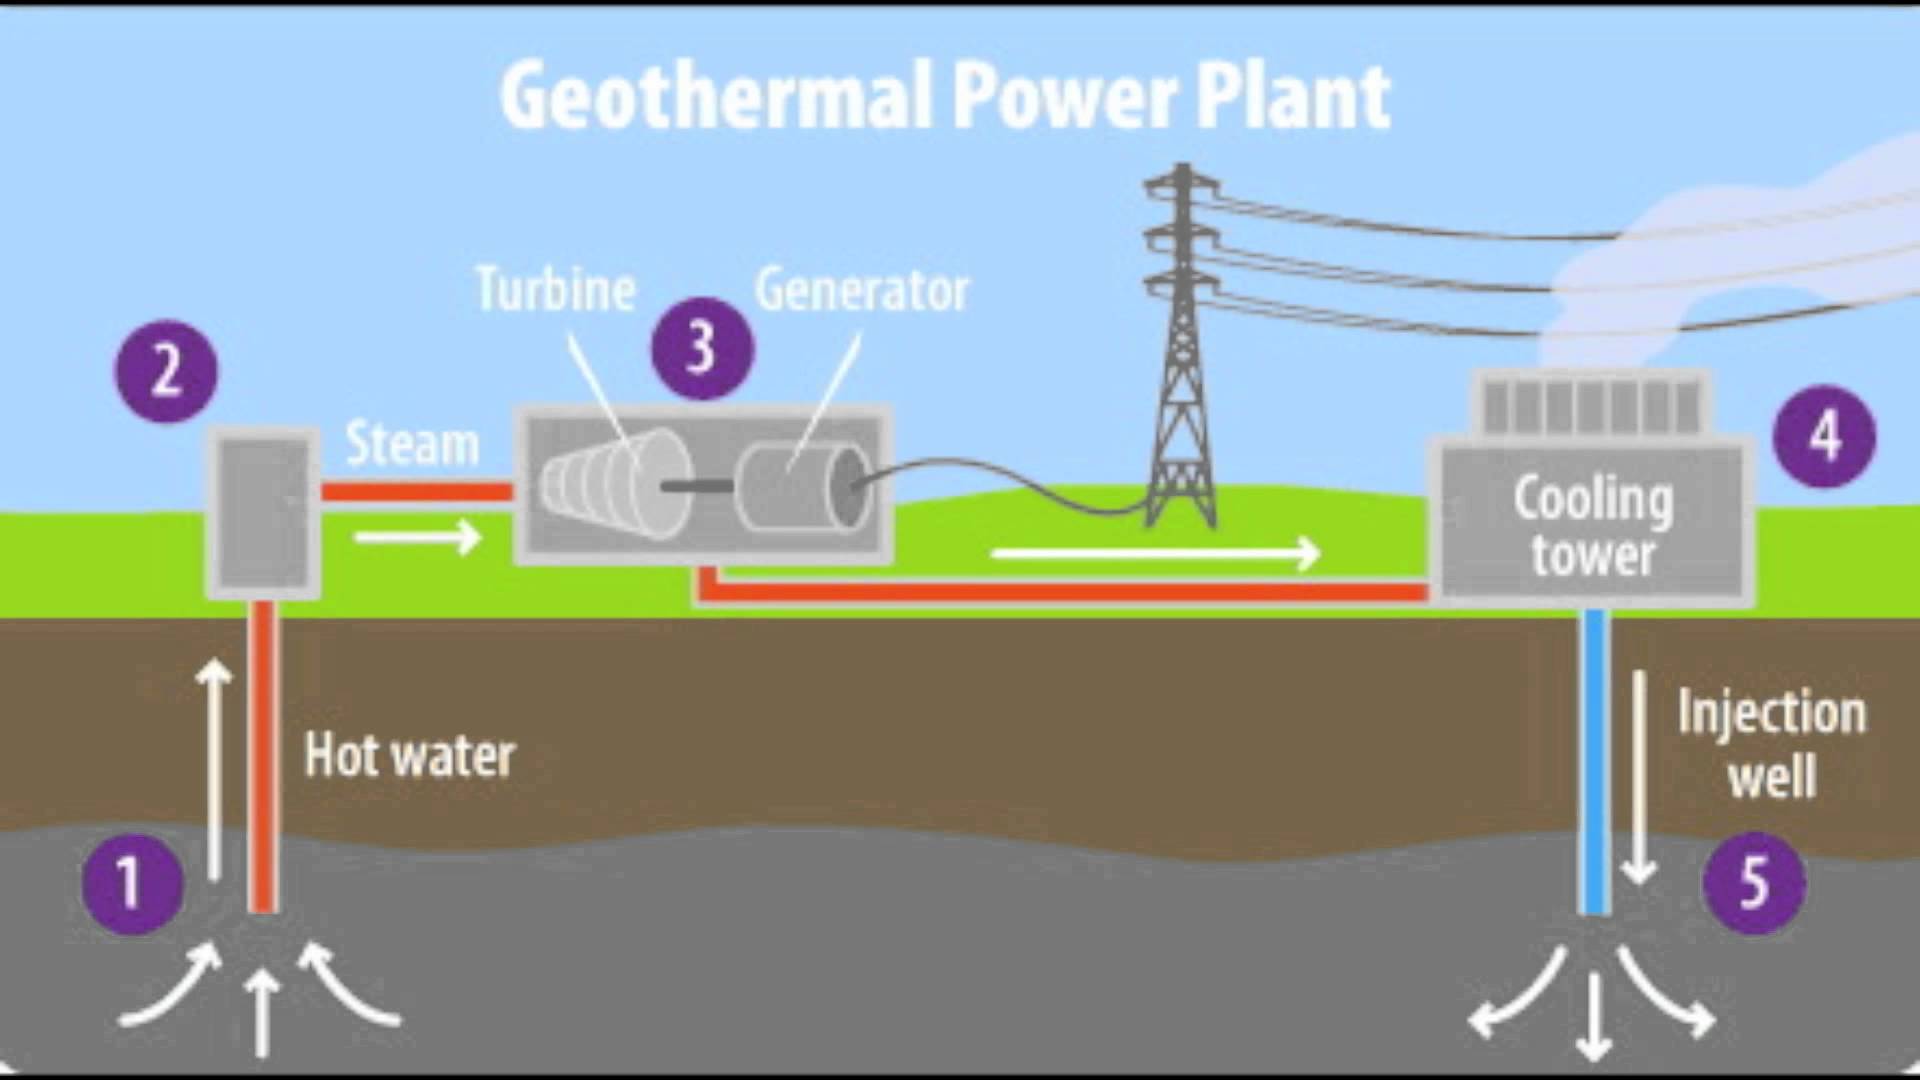 Geothermal Energy - Lessons - Tes Teach